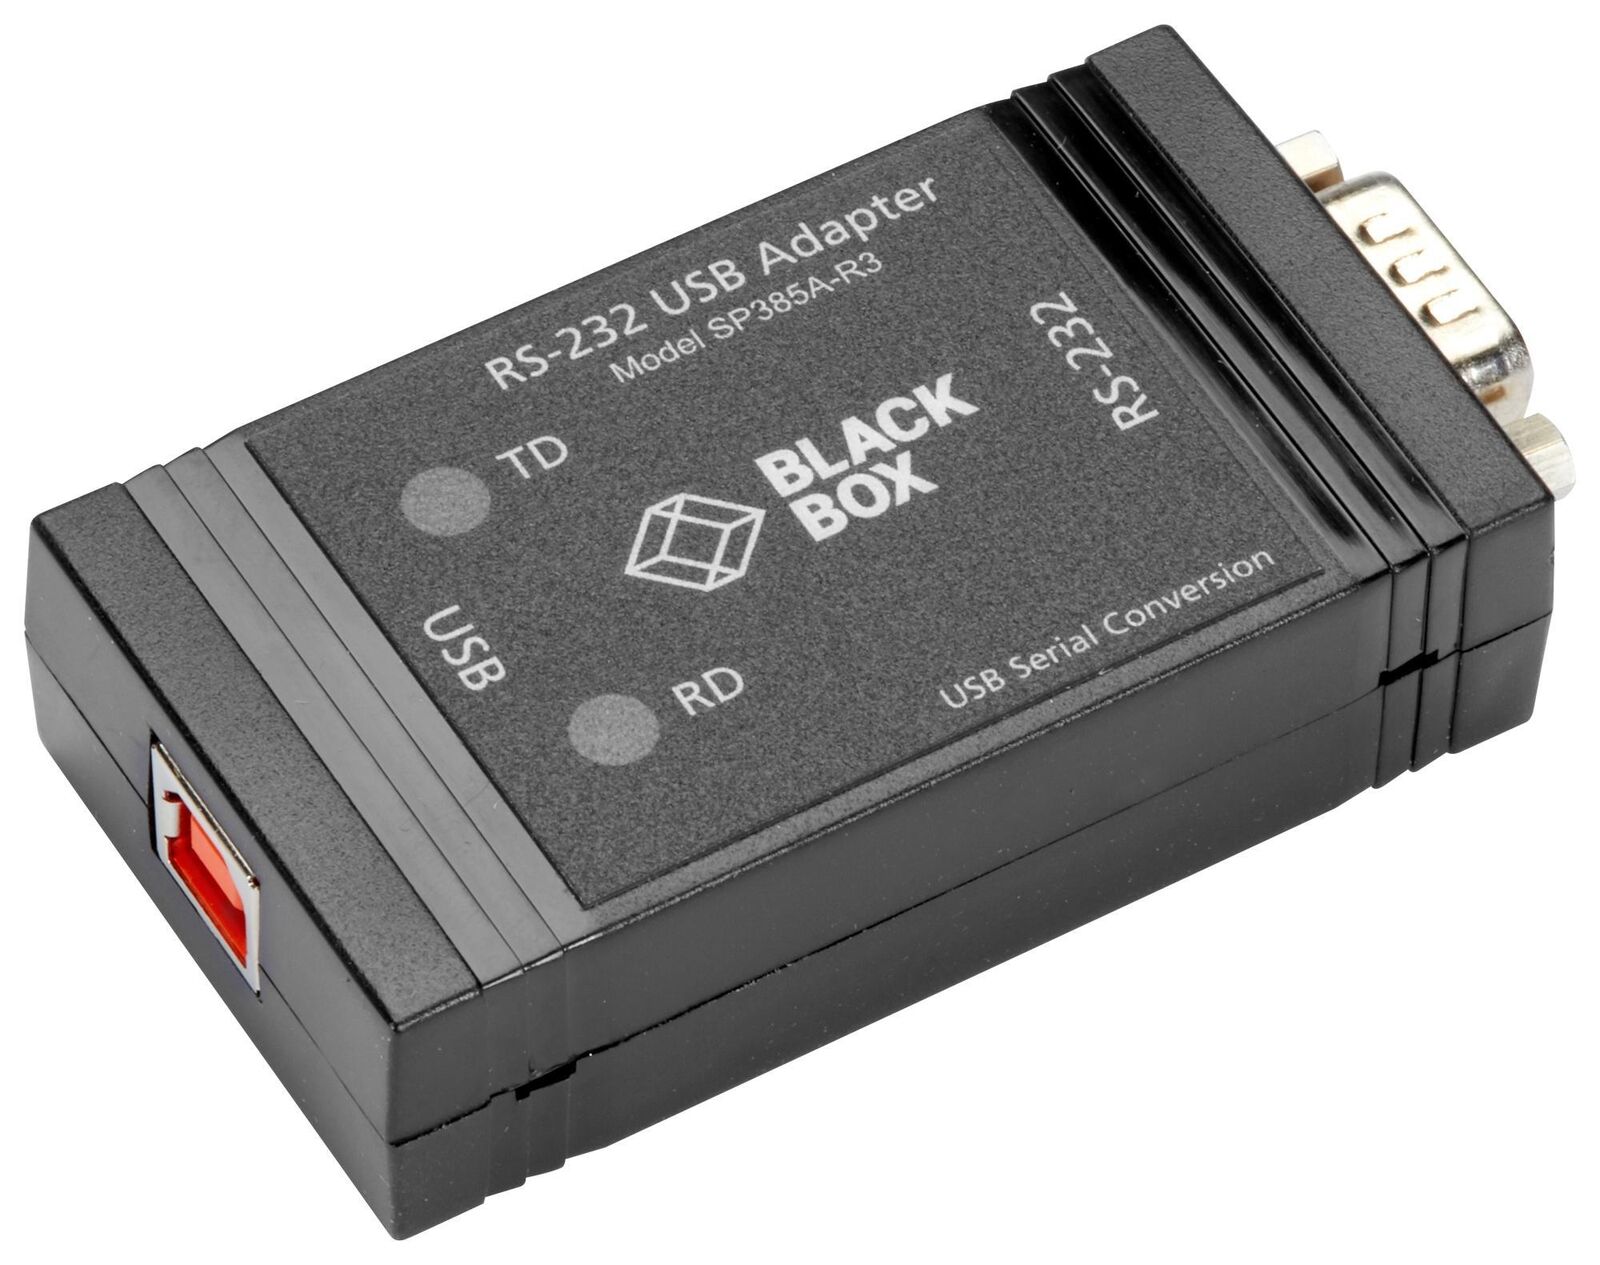 Black Box Network - SP385A-R3 - Black Box USB to RS232 Opto-Isolated Converter